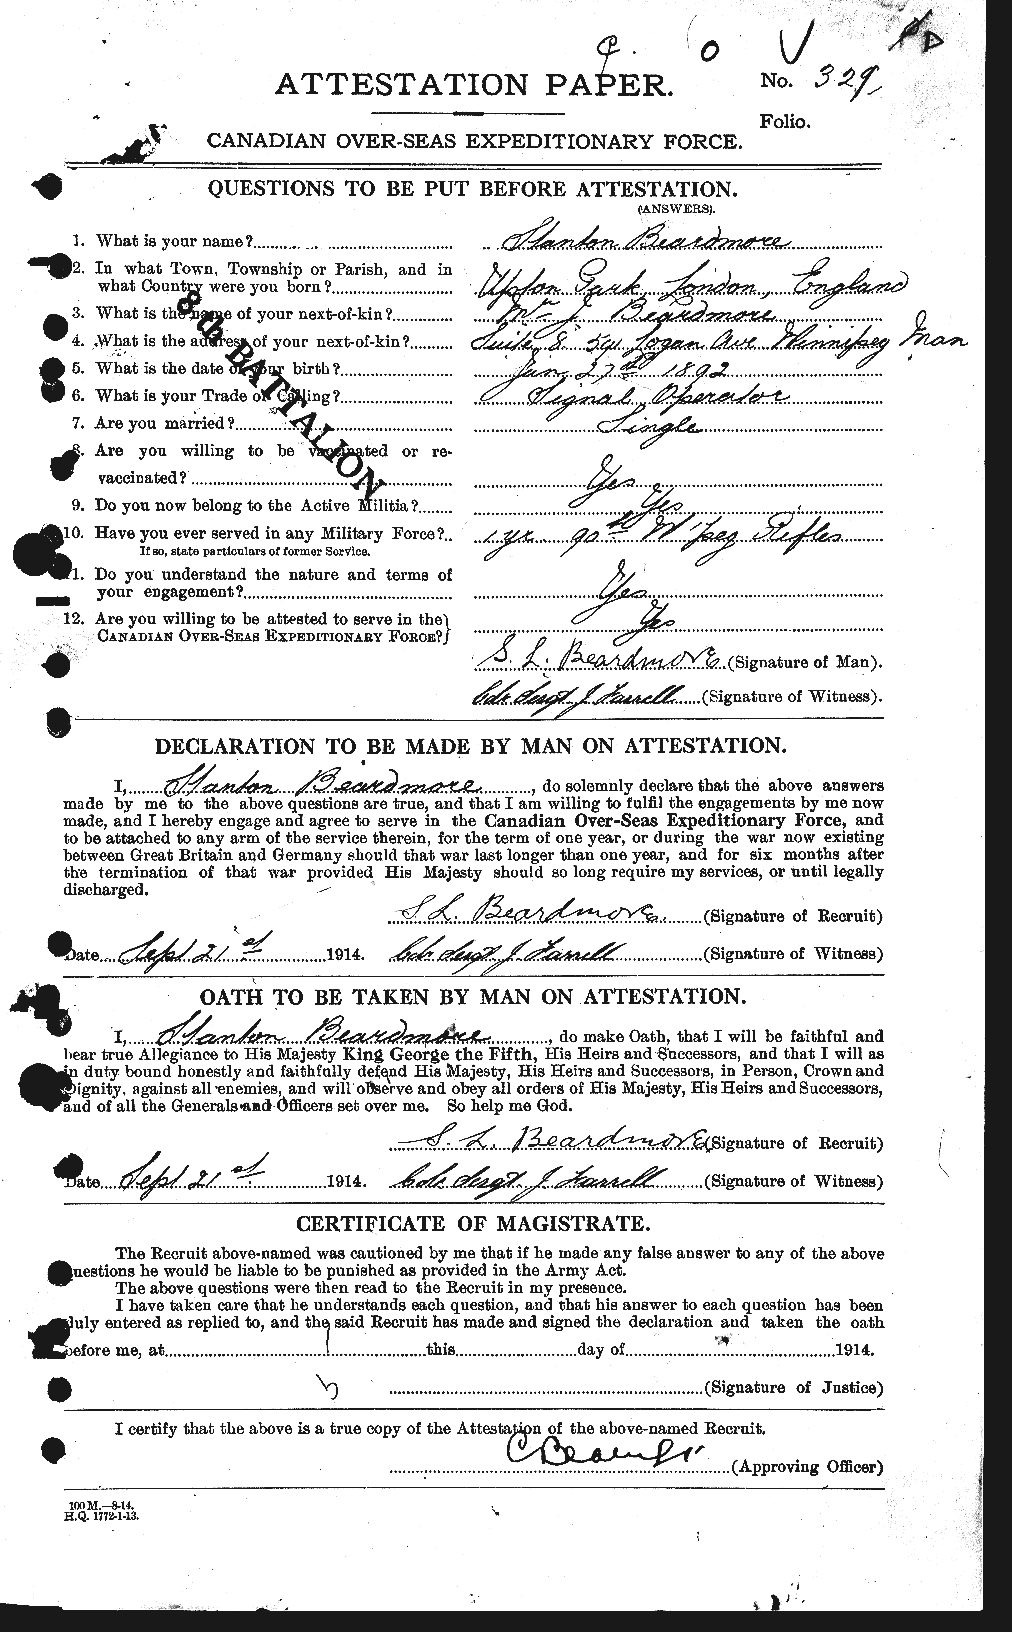 Personnel Records of the First World War - CEF 230304a